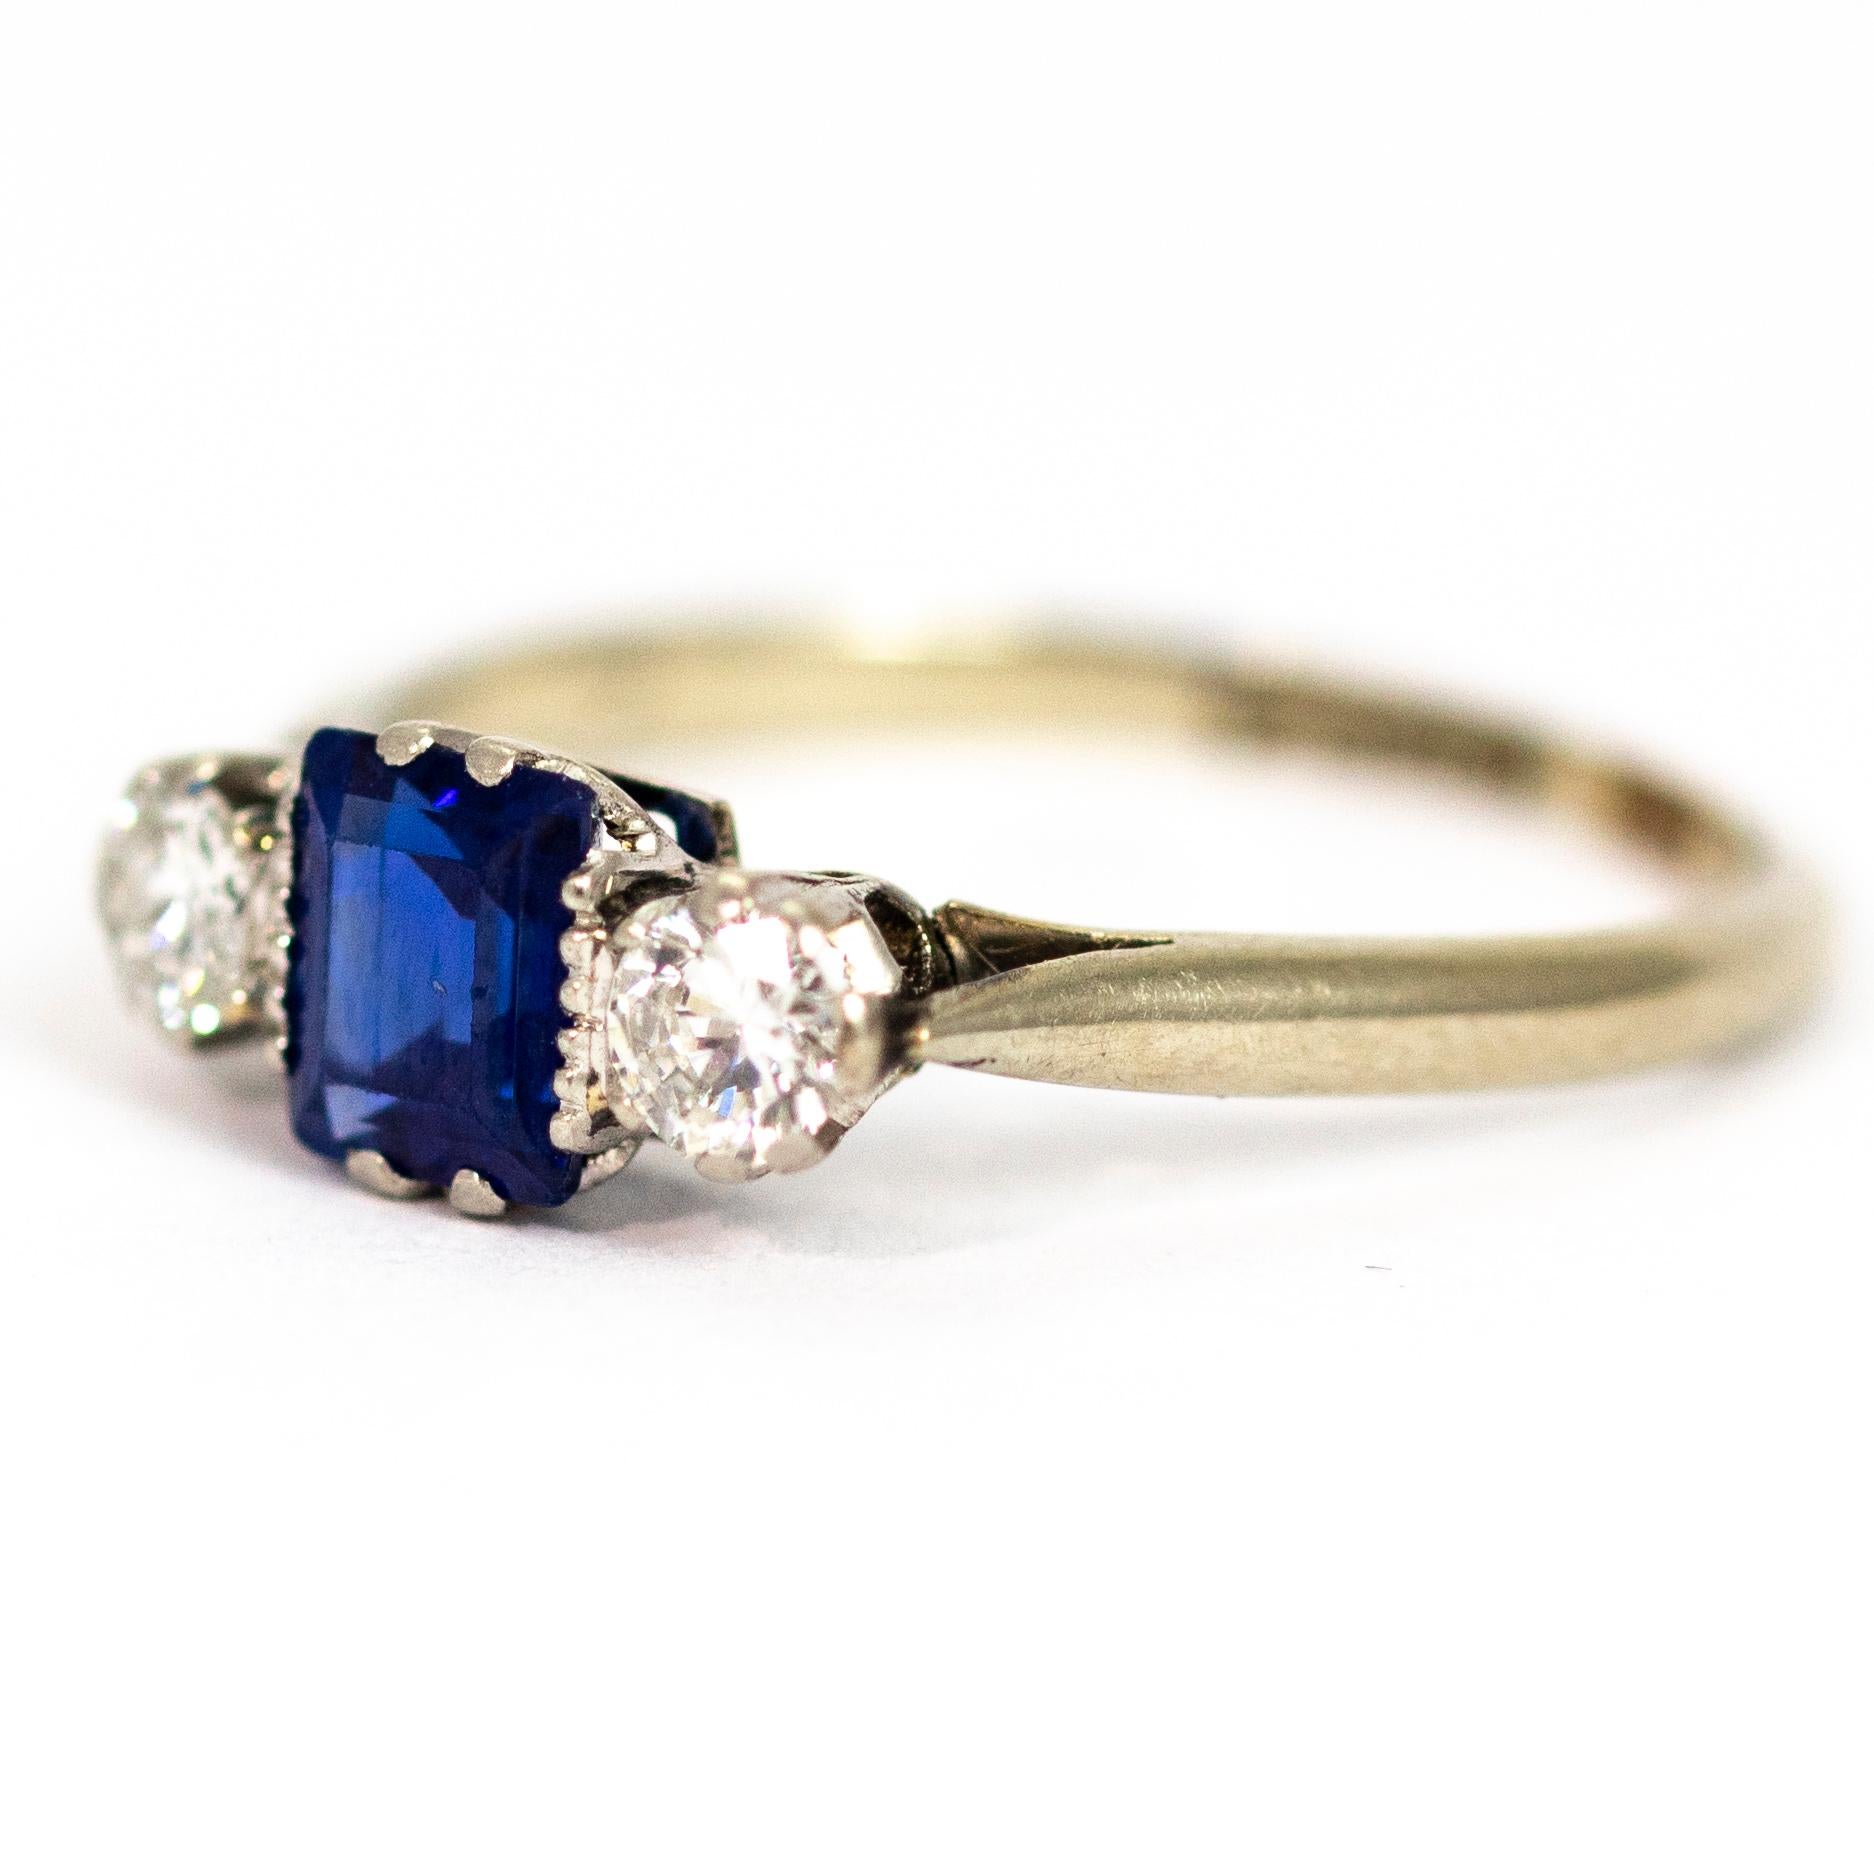 A superb three-stone ring from the Edwardian era, circa 1910. Set with a beautiful blue sapphire flanked by old European cut white diamonds measuring approximately 10 points each. Modelled in 18 carat white gold and platinum:

Ring Size: UK M 1/2,